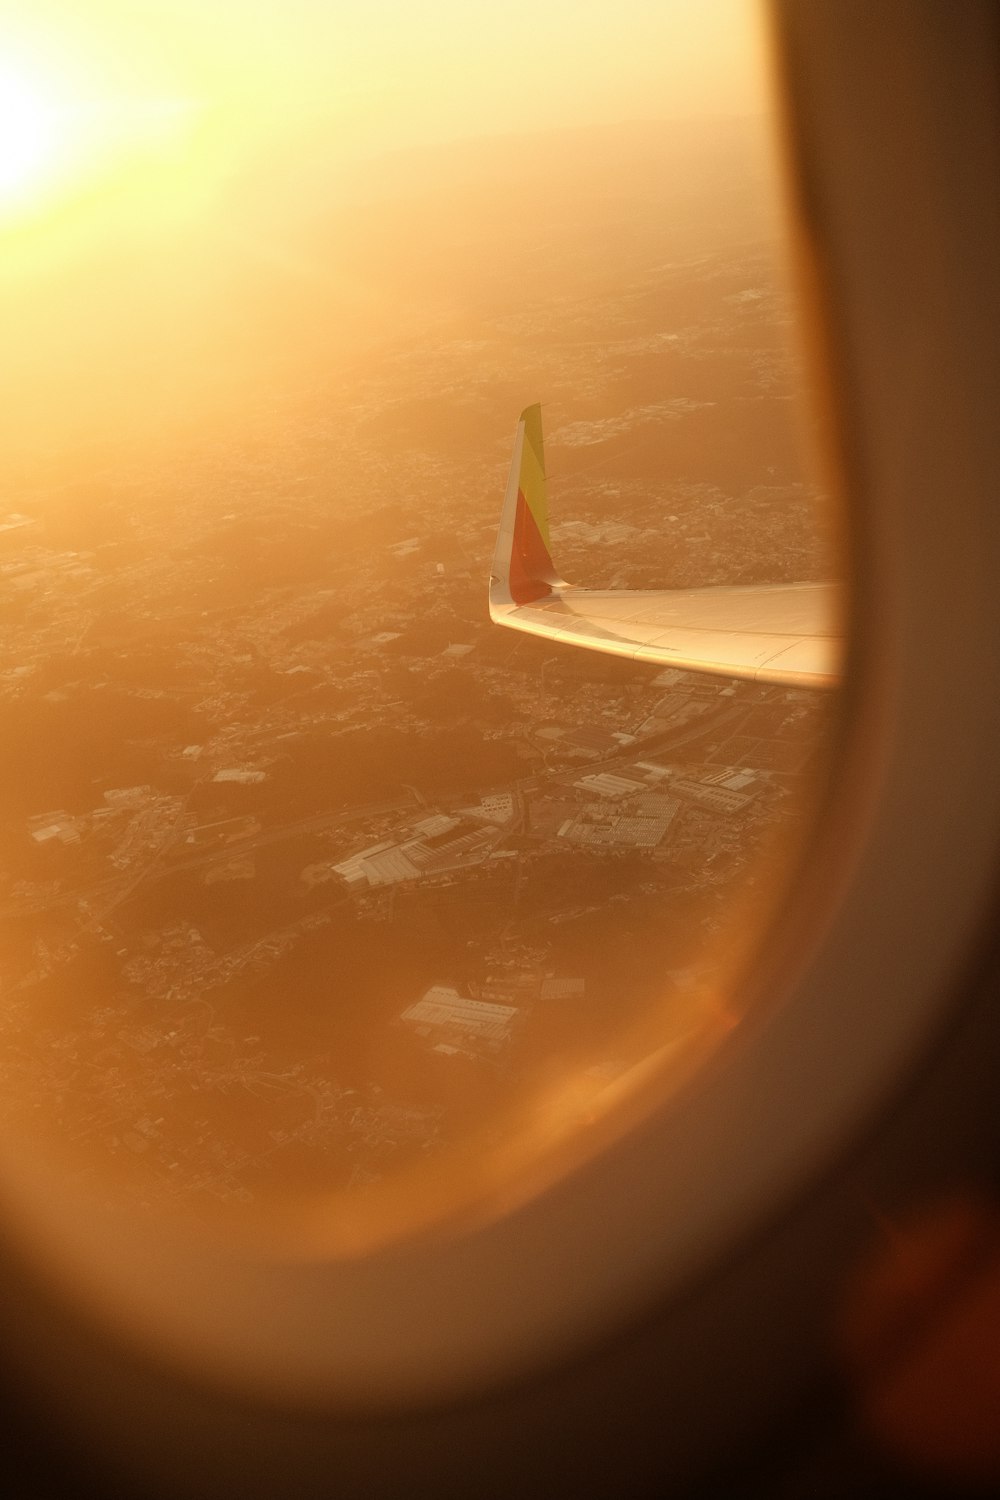 a view of the wing of an airplane as the sun sets